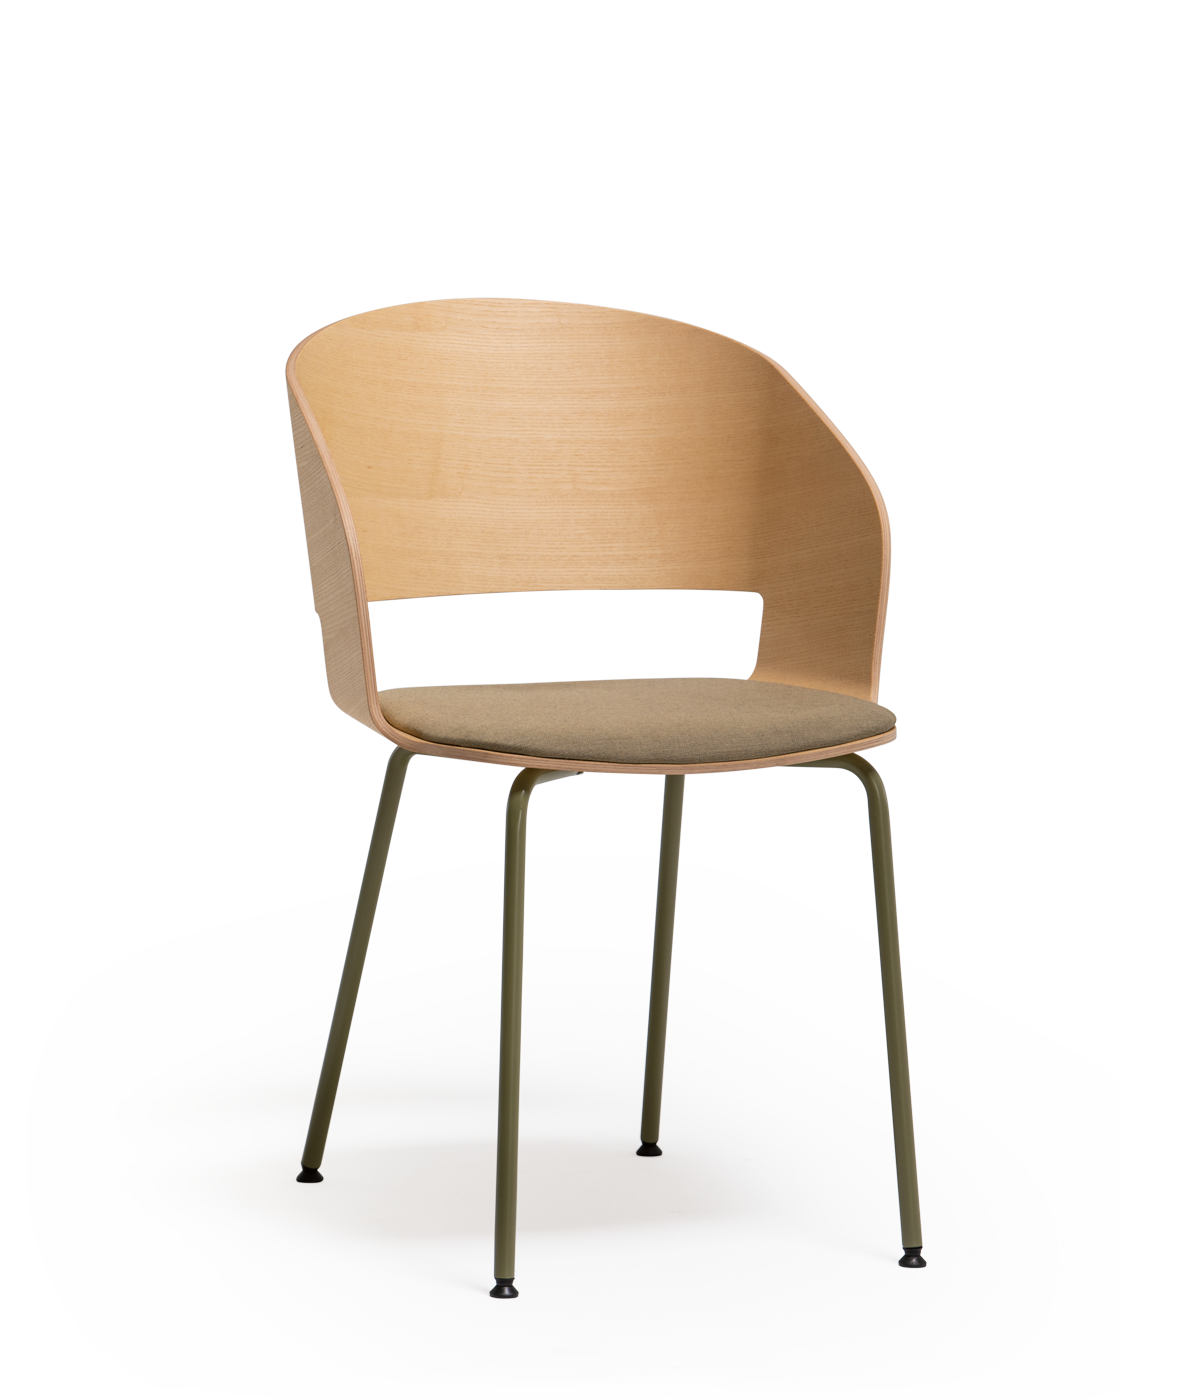 Vergés - Goose chair Model A with armrests and metallic legs